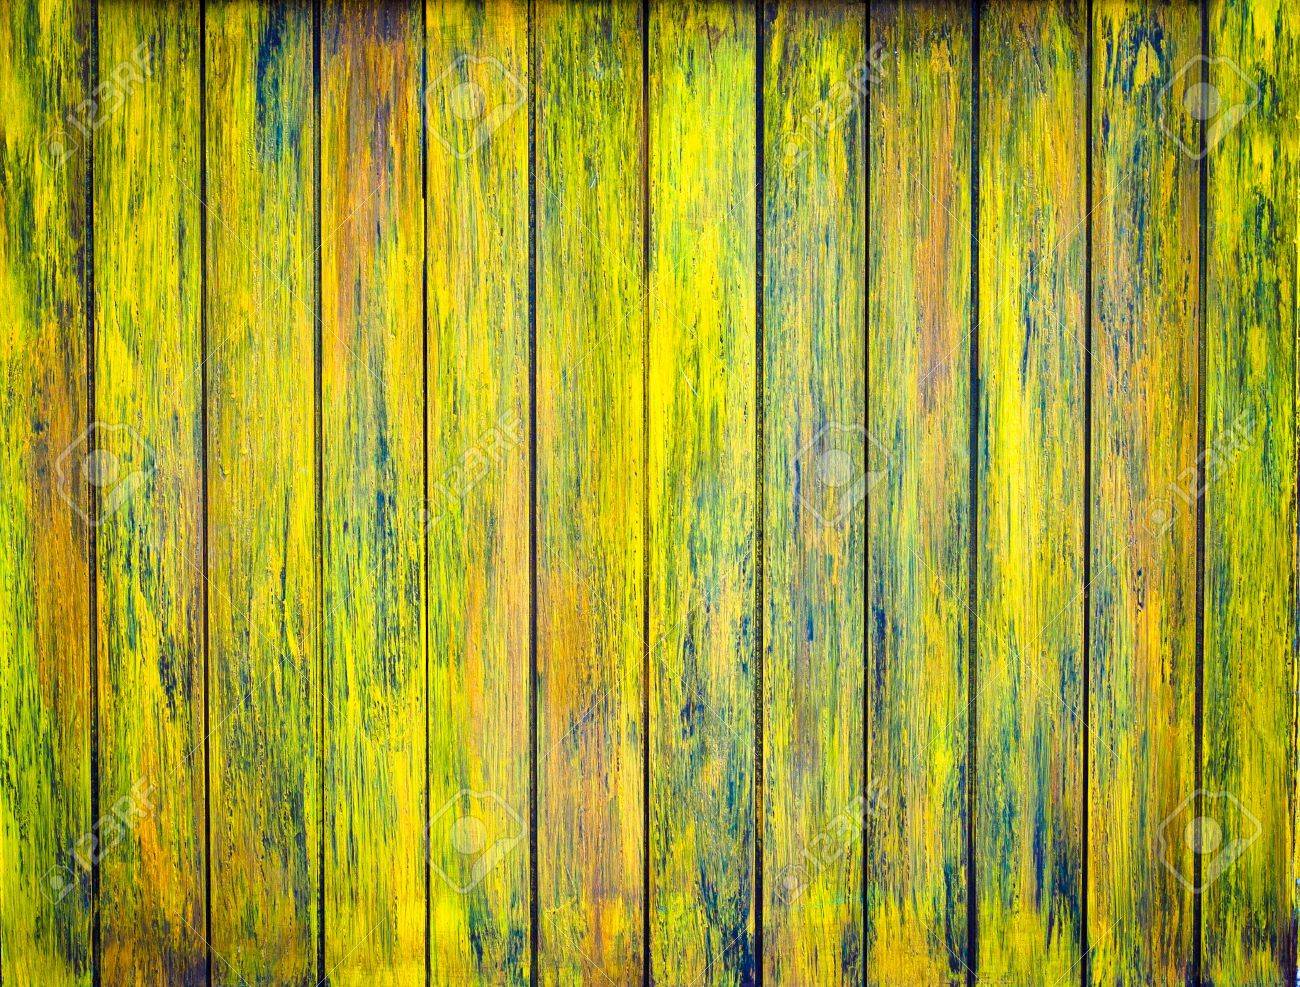 A Striking Multi Colored Wooden Fence Background Image Stock Photo